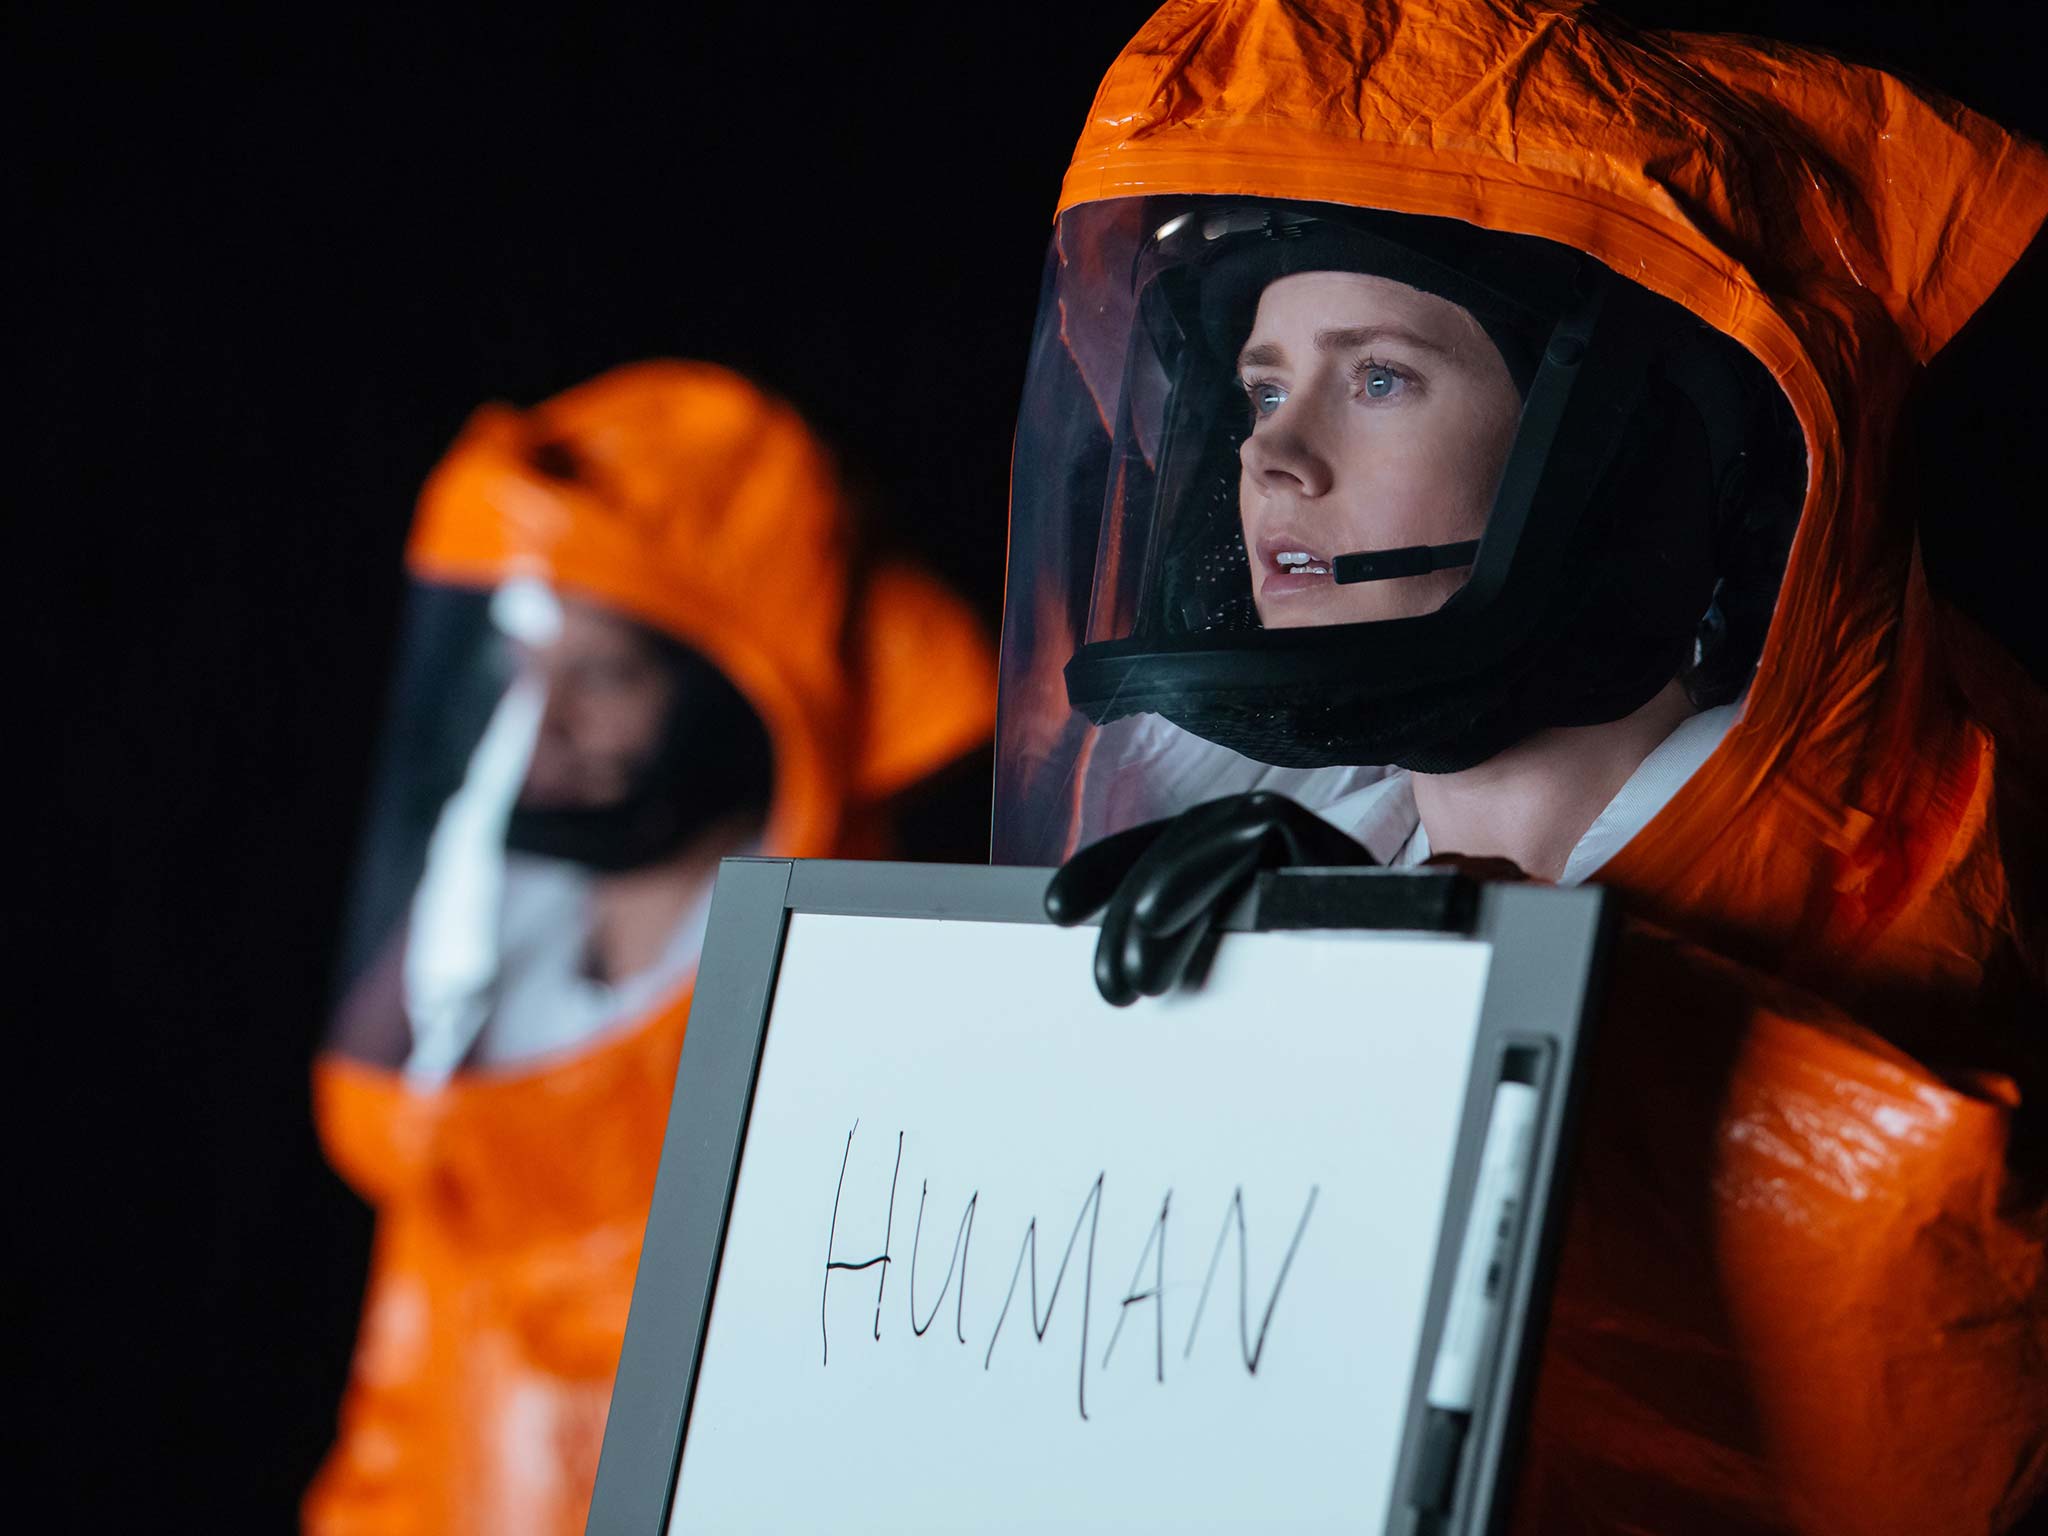 You have arrived: Amy Adams makes first contact in ‘Arrival’